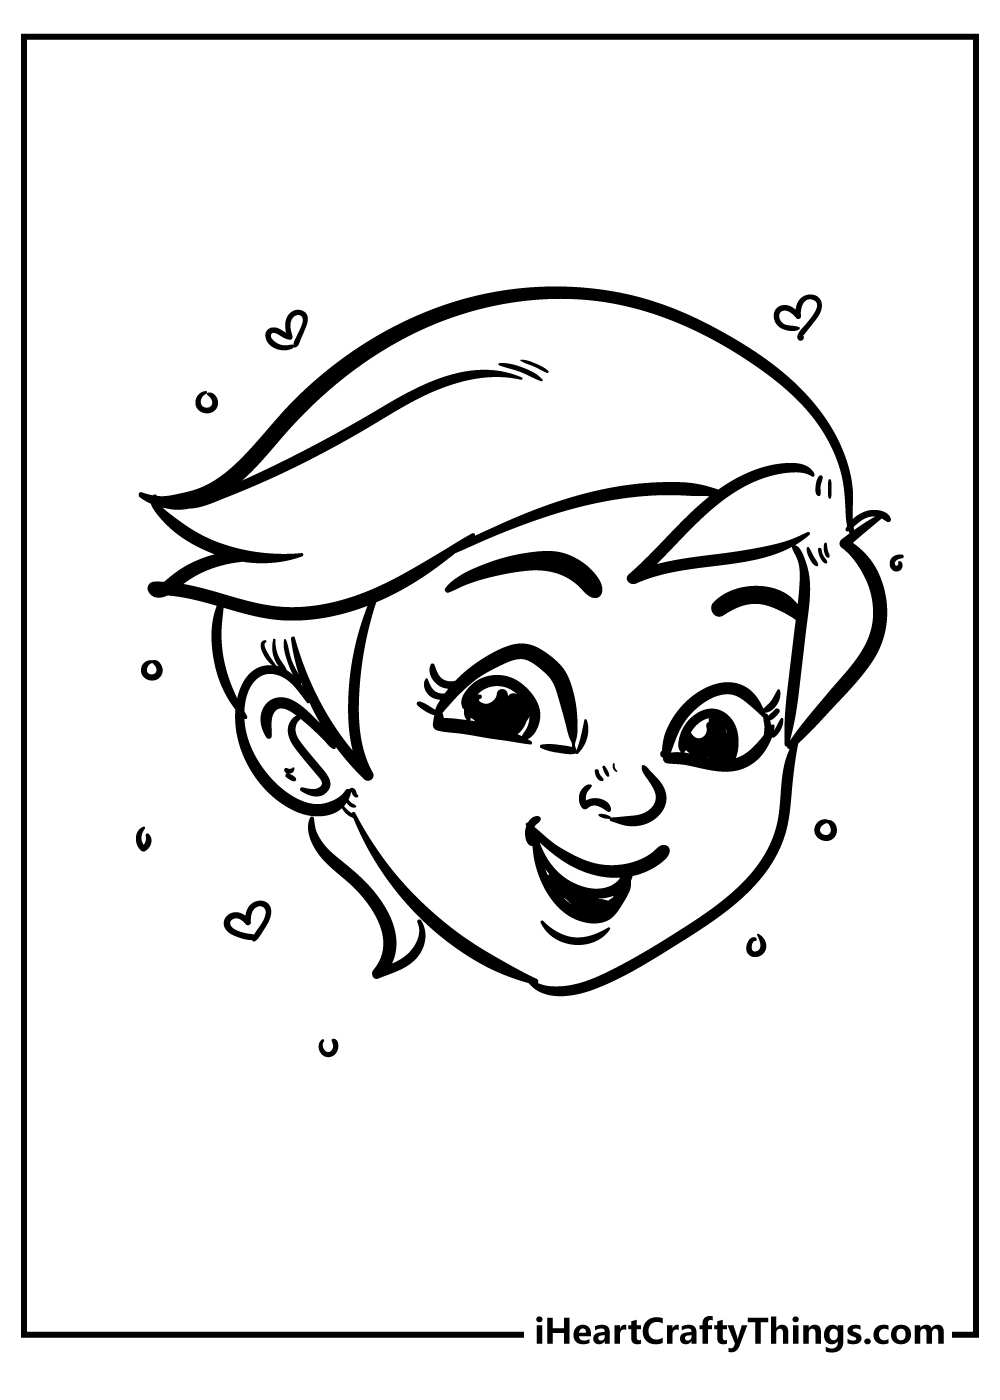 Happy Coloring Pages for kids free download